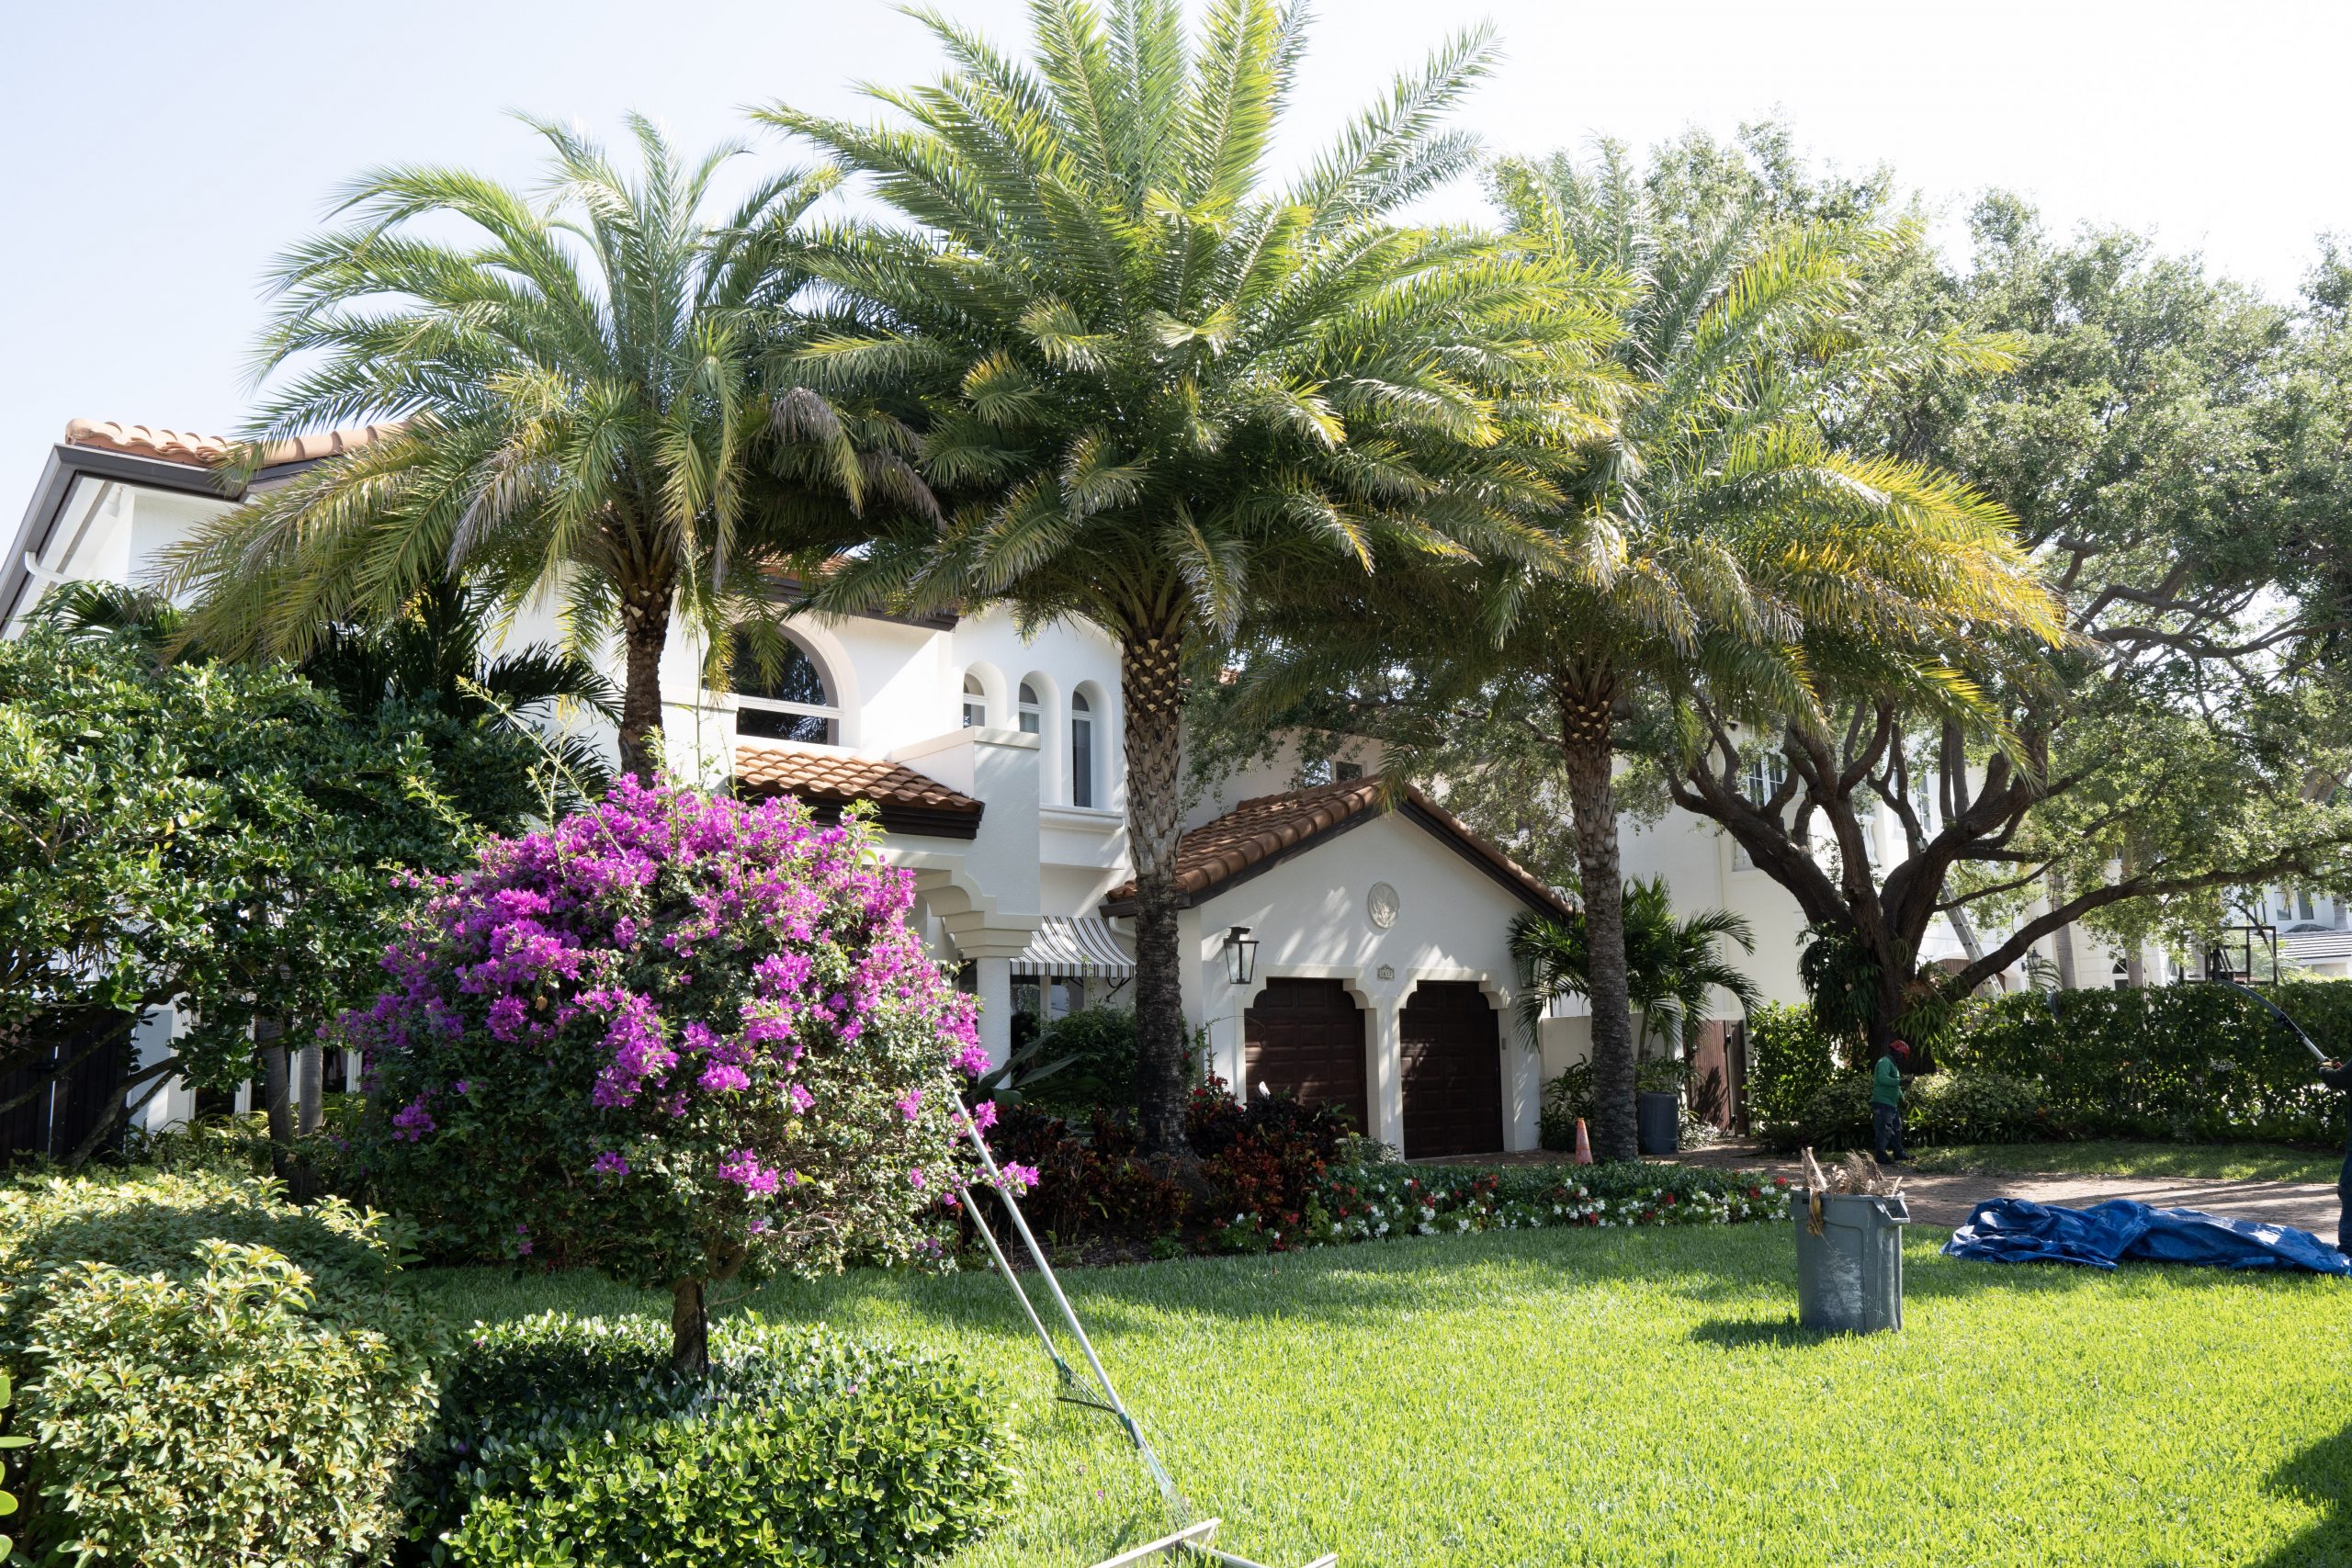 Real Tree Trimming & Landscaping, Inc Offers Award-Winning Tree Service in Pompano Beach